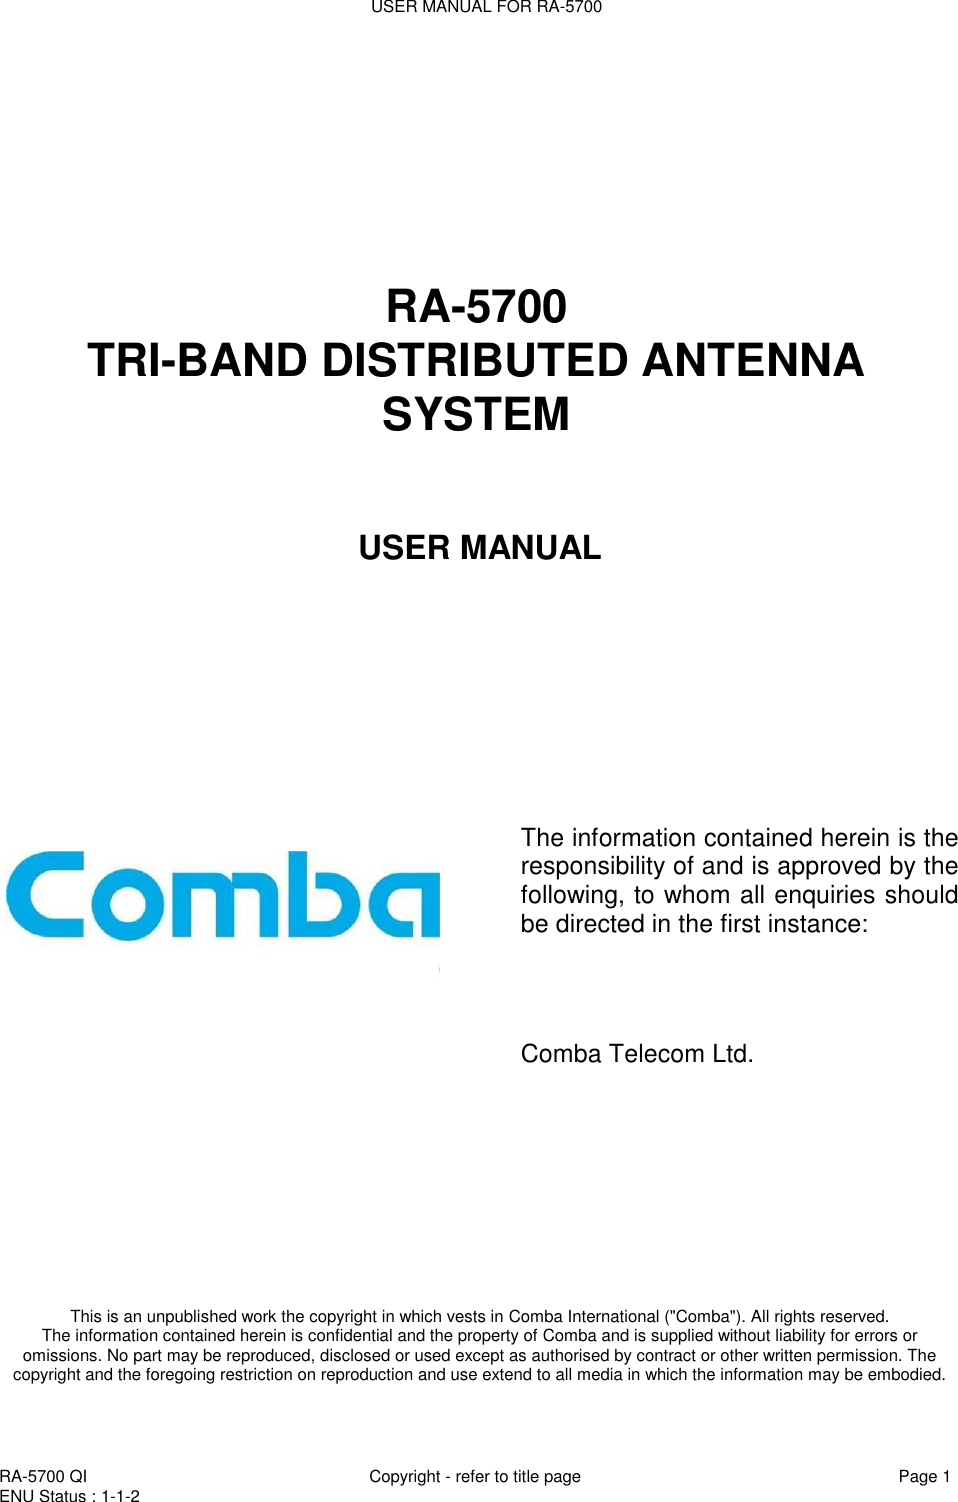 USER MANUAL FOR RA-5700  RA-5700 QI  Copyright - refer to title page Page 1 ENU Status : 1-1-2           USER MANUAL       The information contained herein is the responsibility of and is approved by the following, to whom all enquiries should be directed in the first instance:              Comba Telecom Ltd.  This is an unpublished work the copyright in which vests in Comba International (&quot;Comba&quot;). All rights reserved. The information contained herein is confidential and the property of Comba and is supplied without liability for errors or omissions. No part may be reproduced, disclosed or used except as authorised by contract or other written permission. The copyright and the foregoing restriction on reproduction and use extend to all media in which the information may be embodied. RA-5700  TRI-BAND DISTRIBUTED ANTENNA SYSTEM    